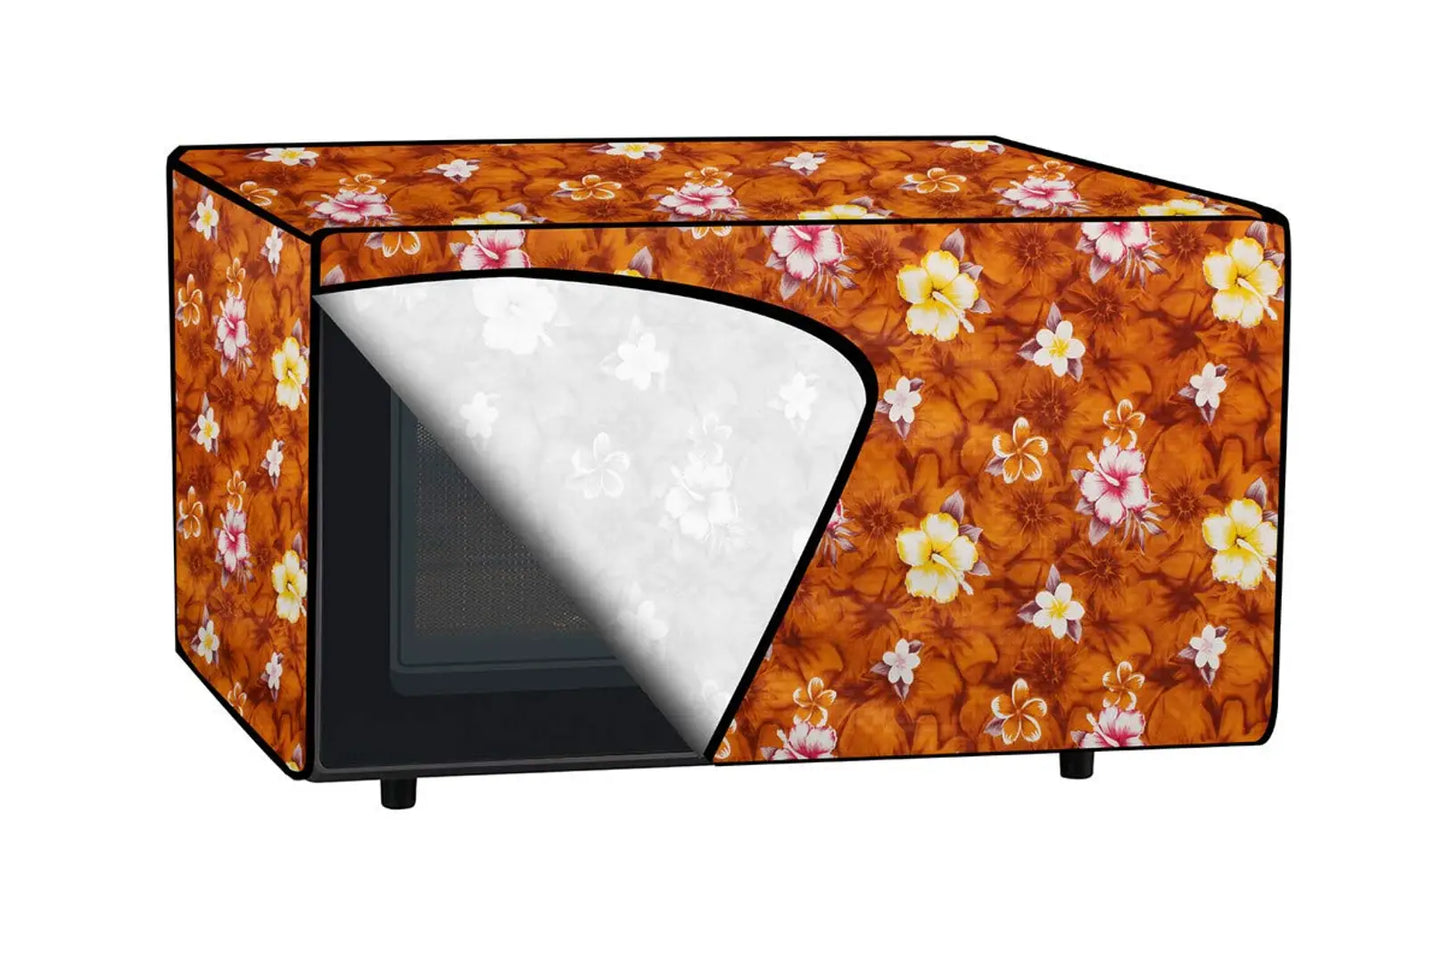 The Furnishing Tree Microwave Oven Cover for LG 28 L Convection Microwave Oven MJ2886BFUM Floral Pattern Orange